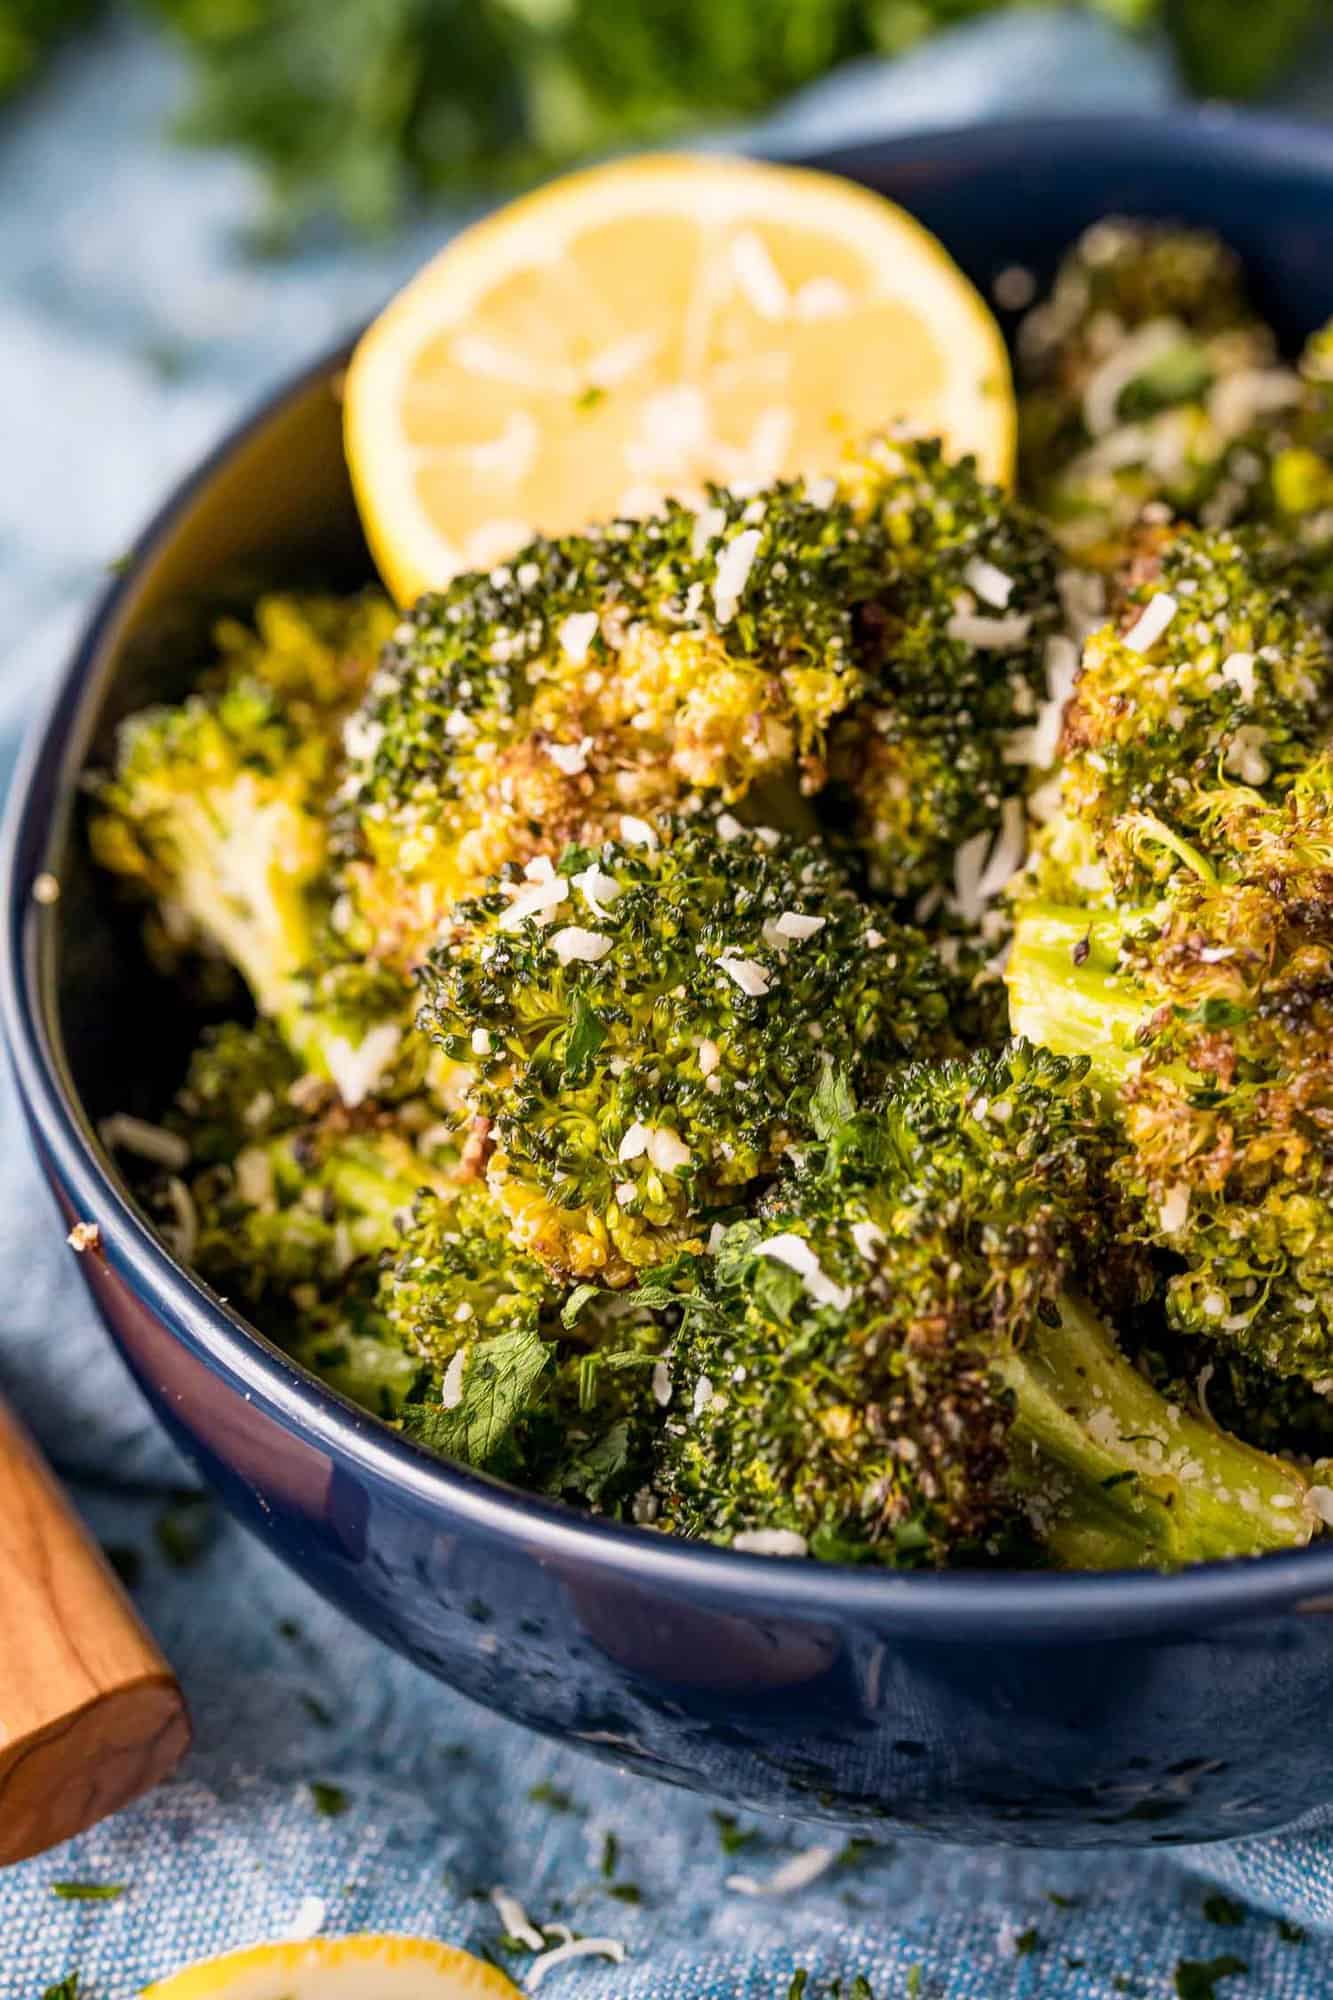 Broccoli roasted with lemon and parmesan in a bowl with lemon slice.